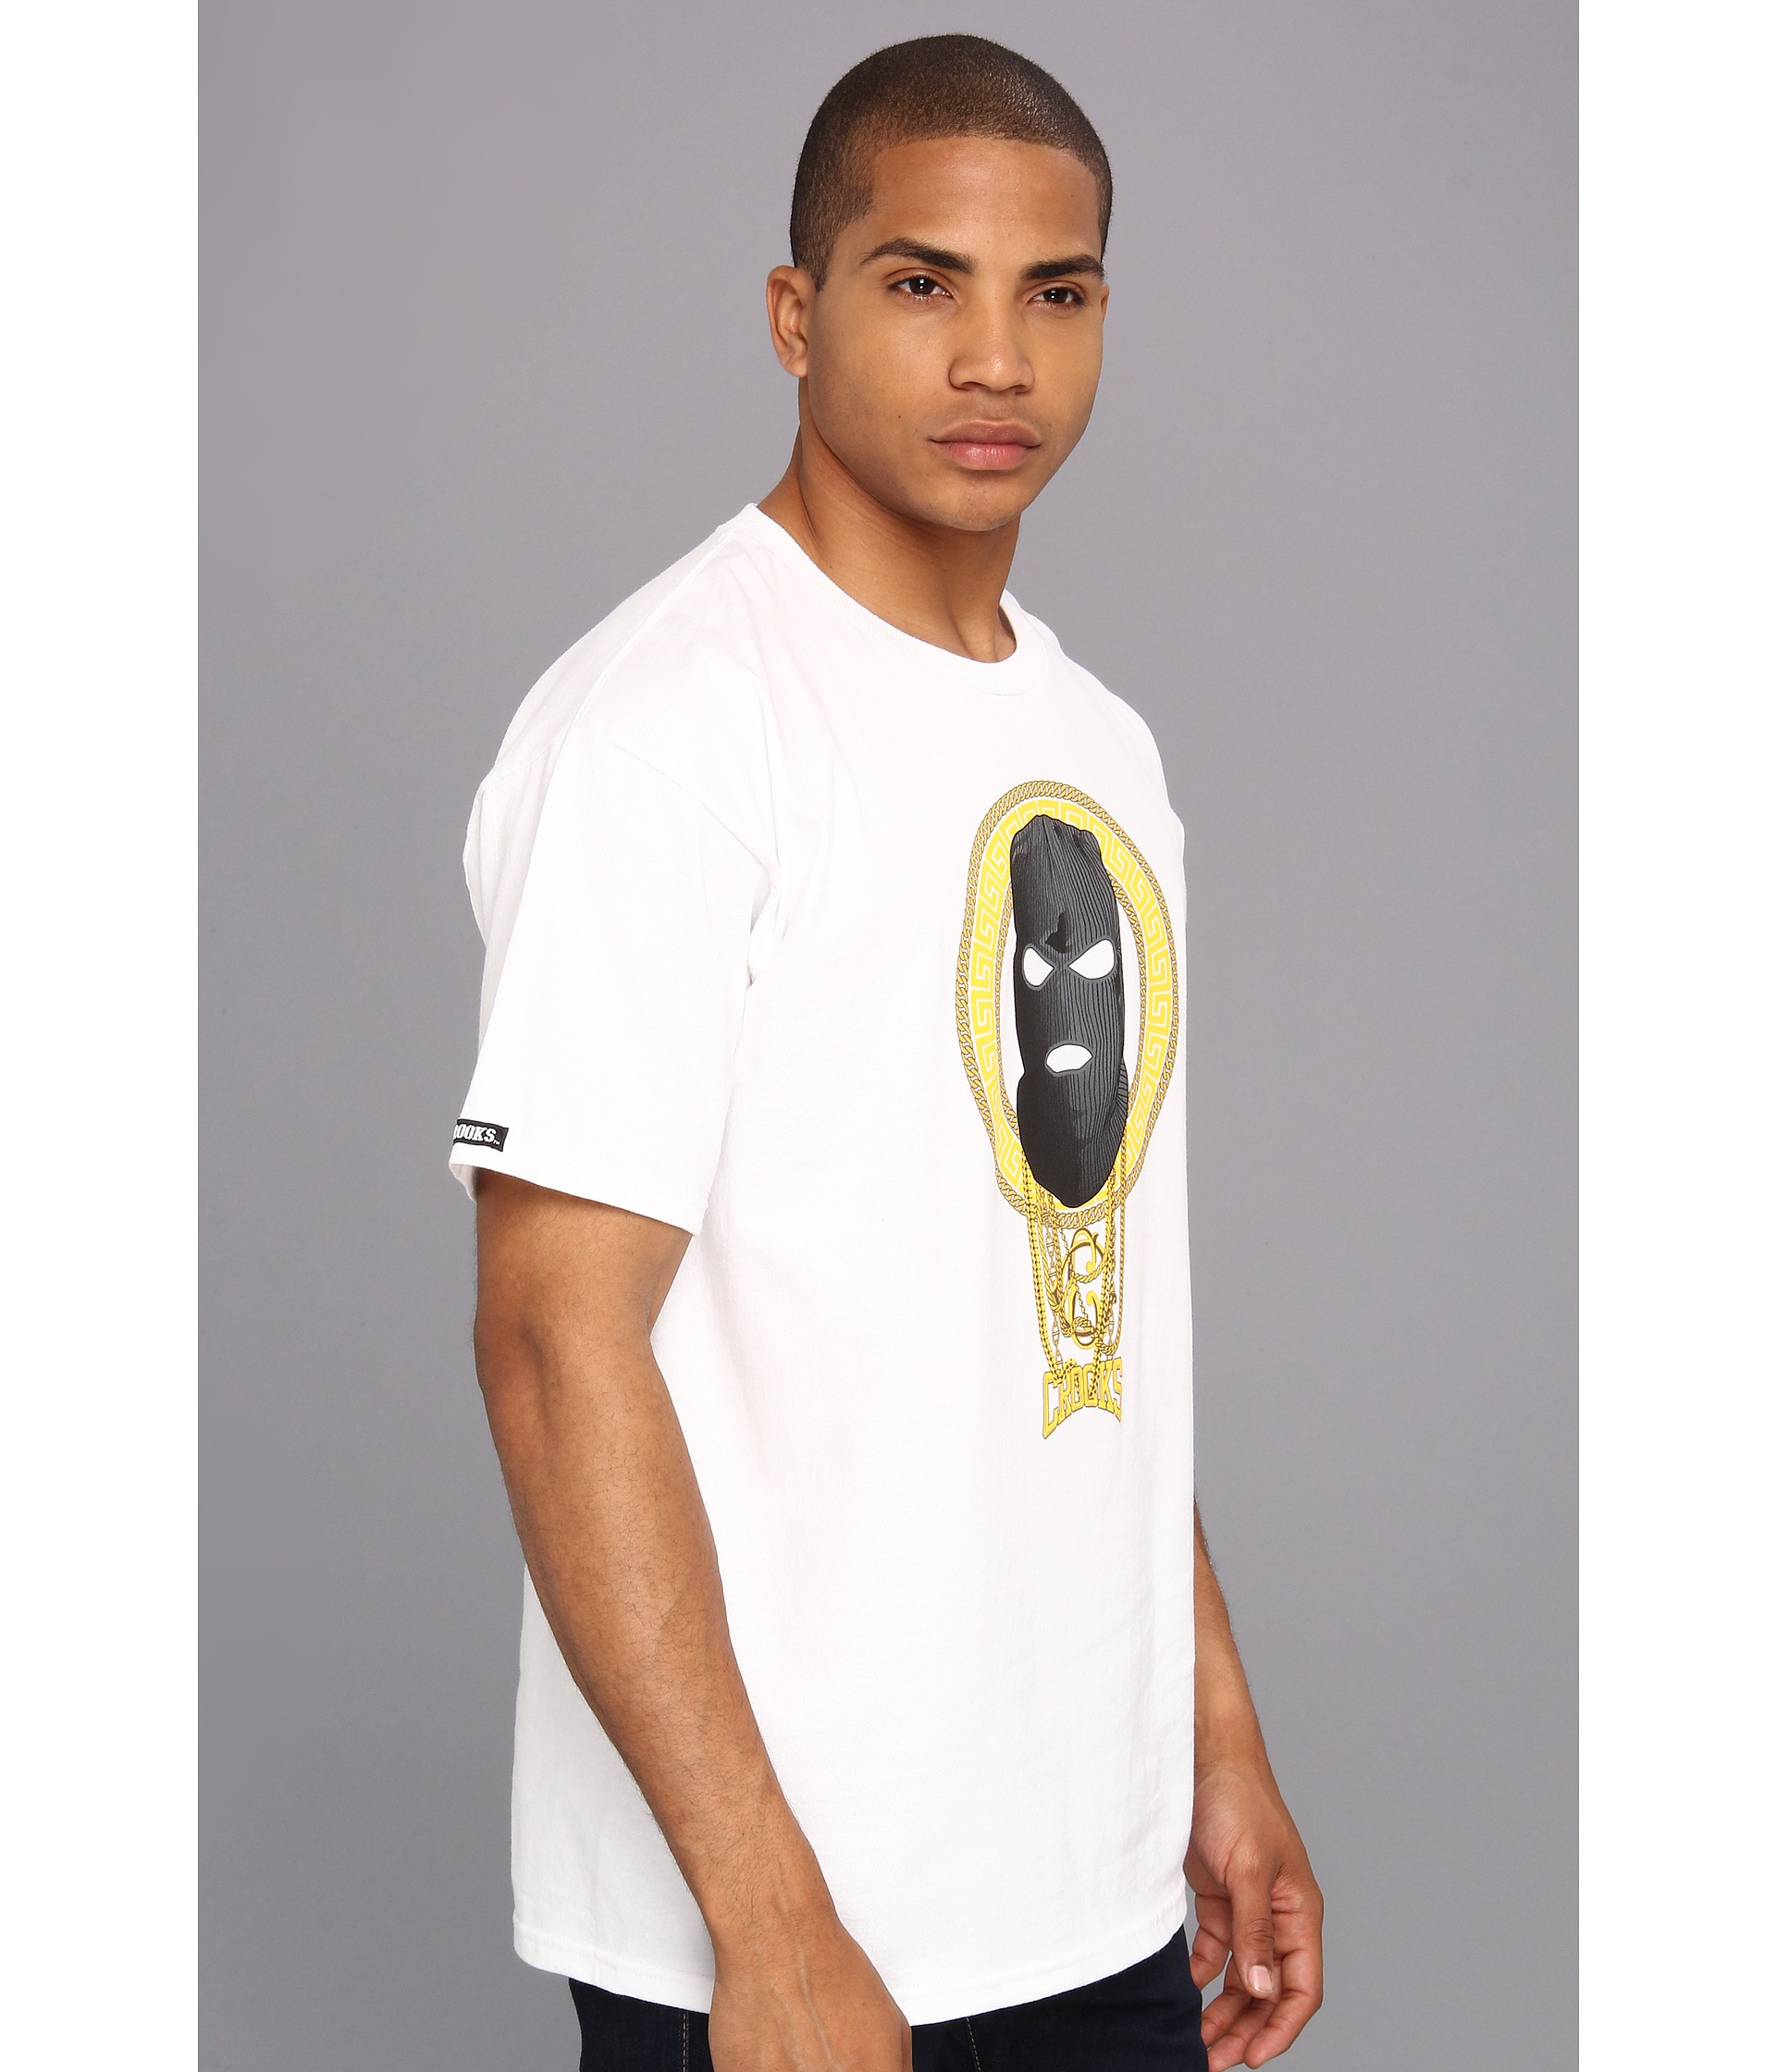 Lyst - Crooks And Castles Goon Squad Knit Crew Tshirt in White for Men